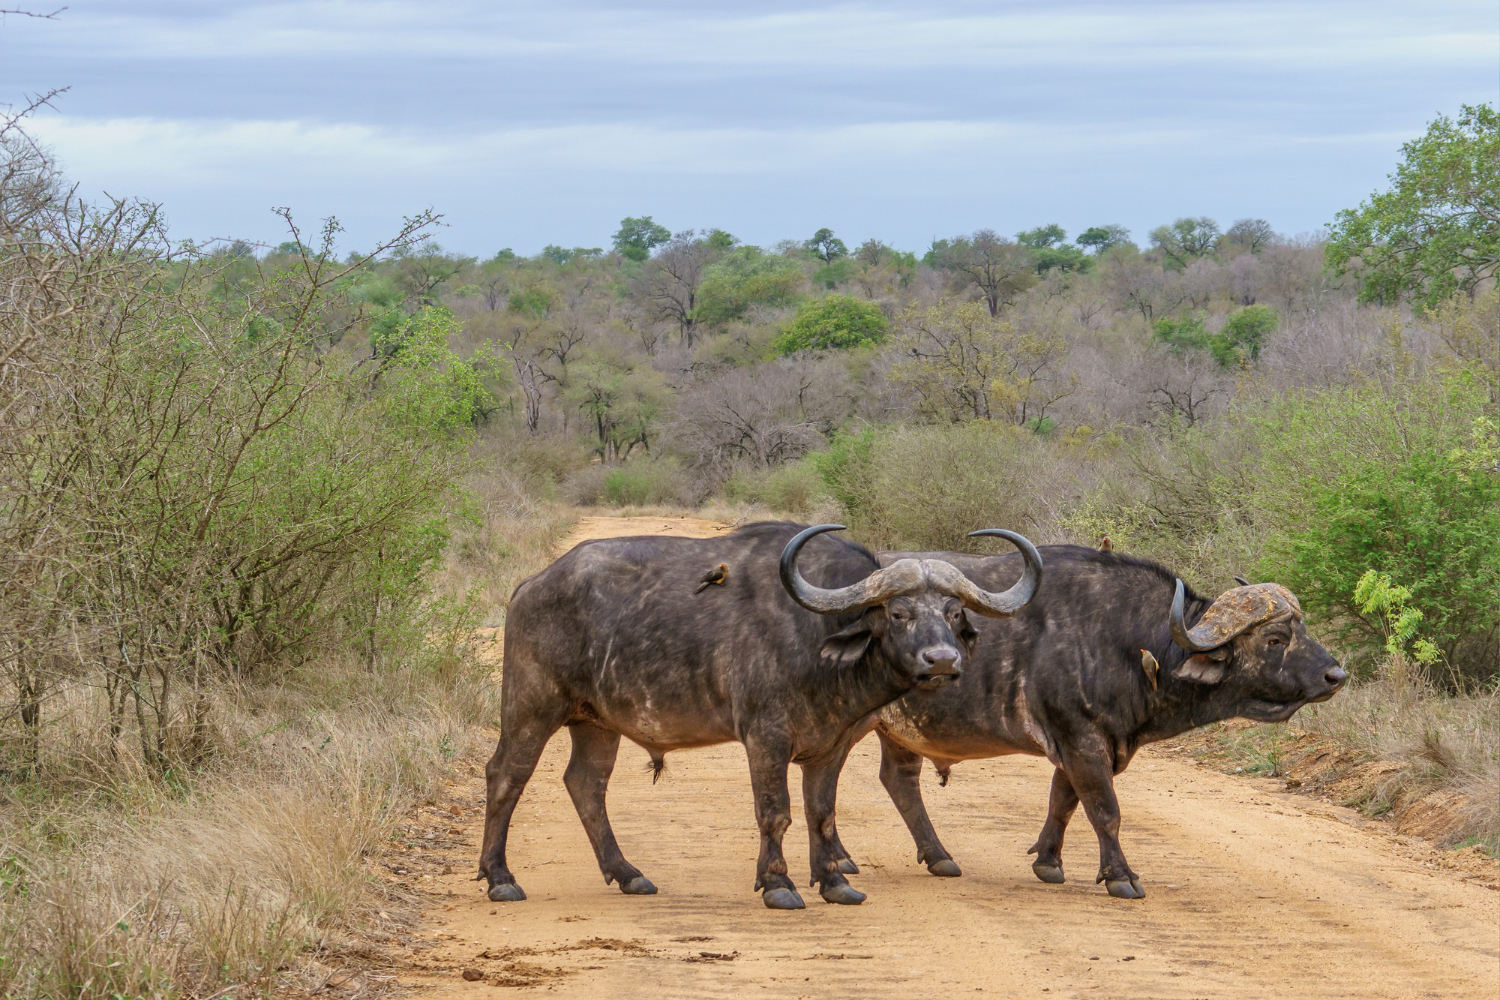 eye-level-shot-two-giant-horned-african-buffalos-standing-dirty-unpaved-road